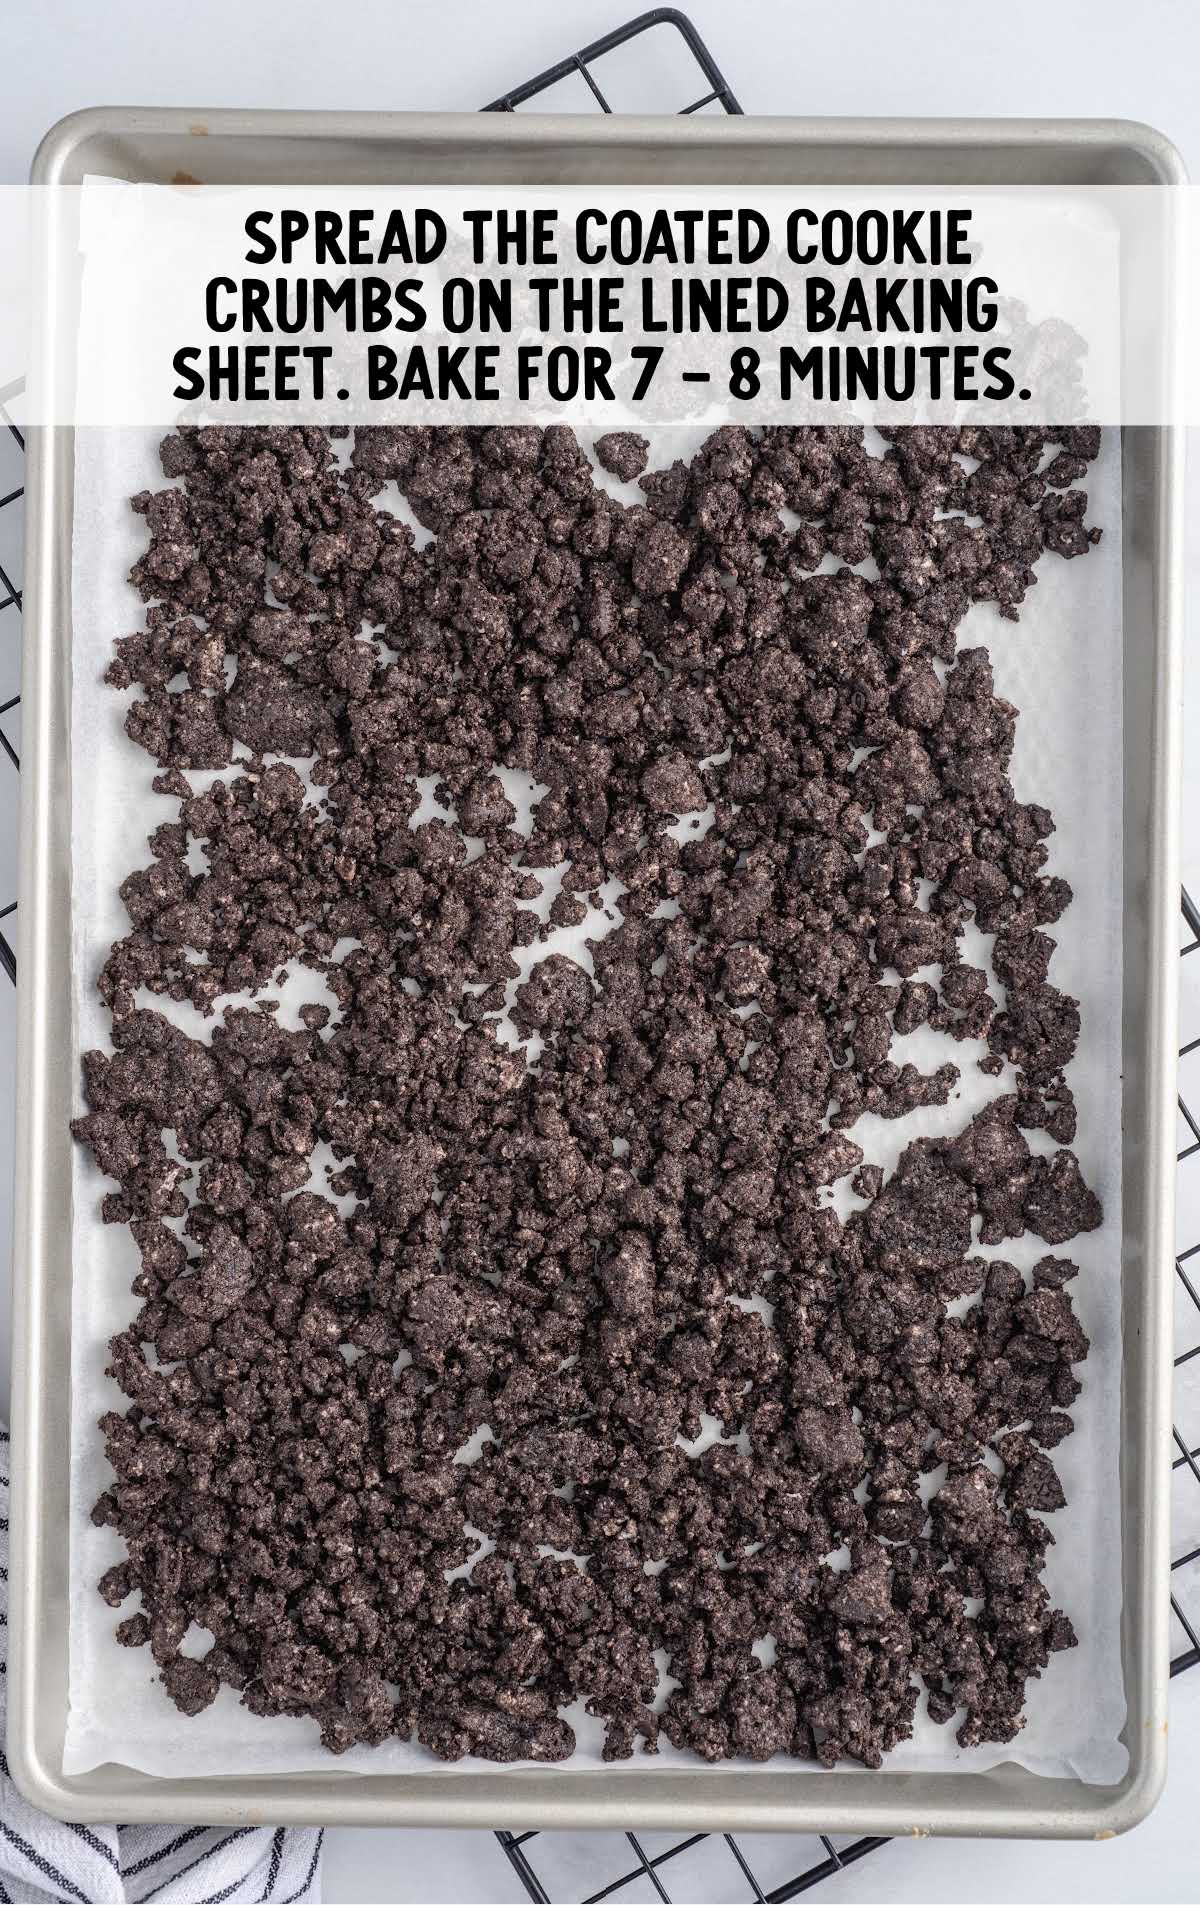 coated cookies crumbs spread on the lined baking sheet